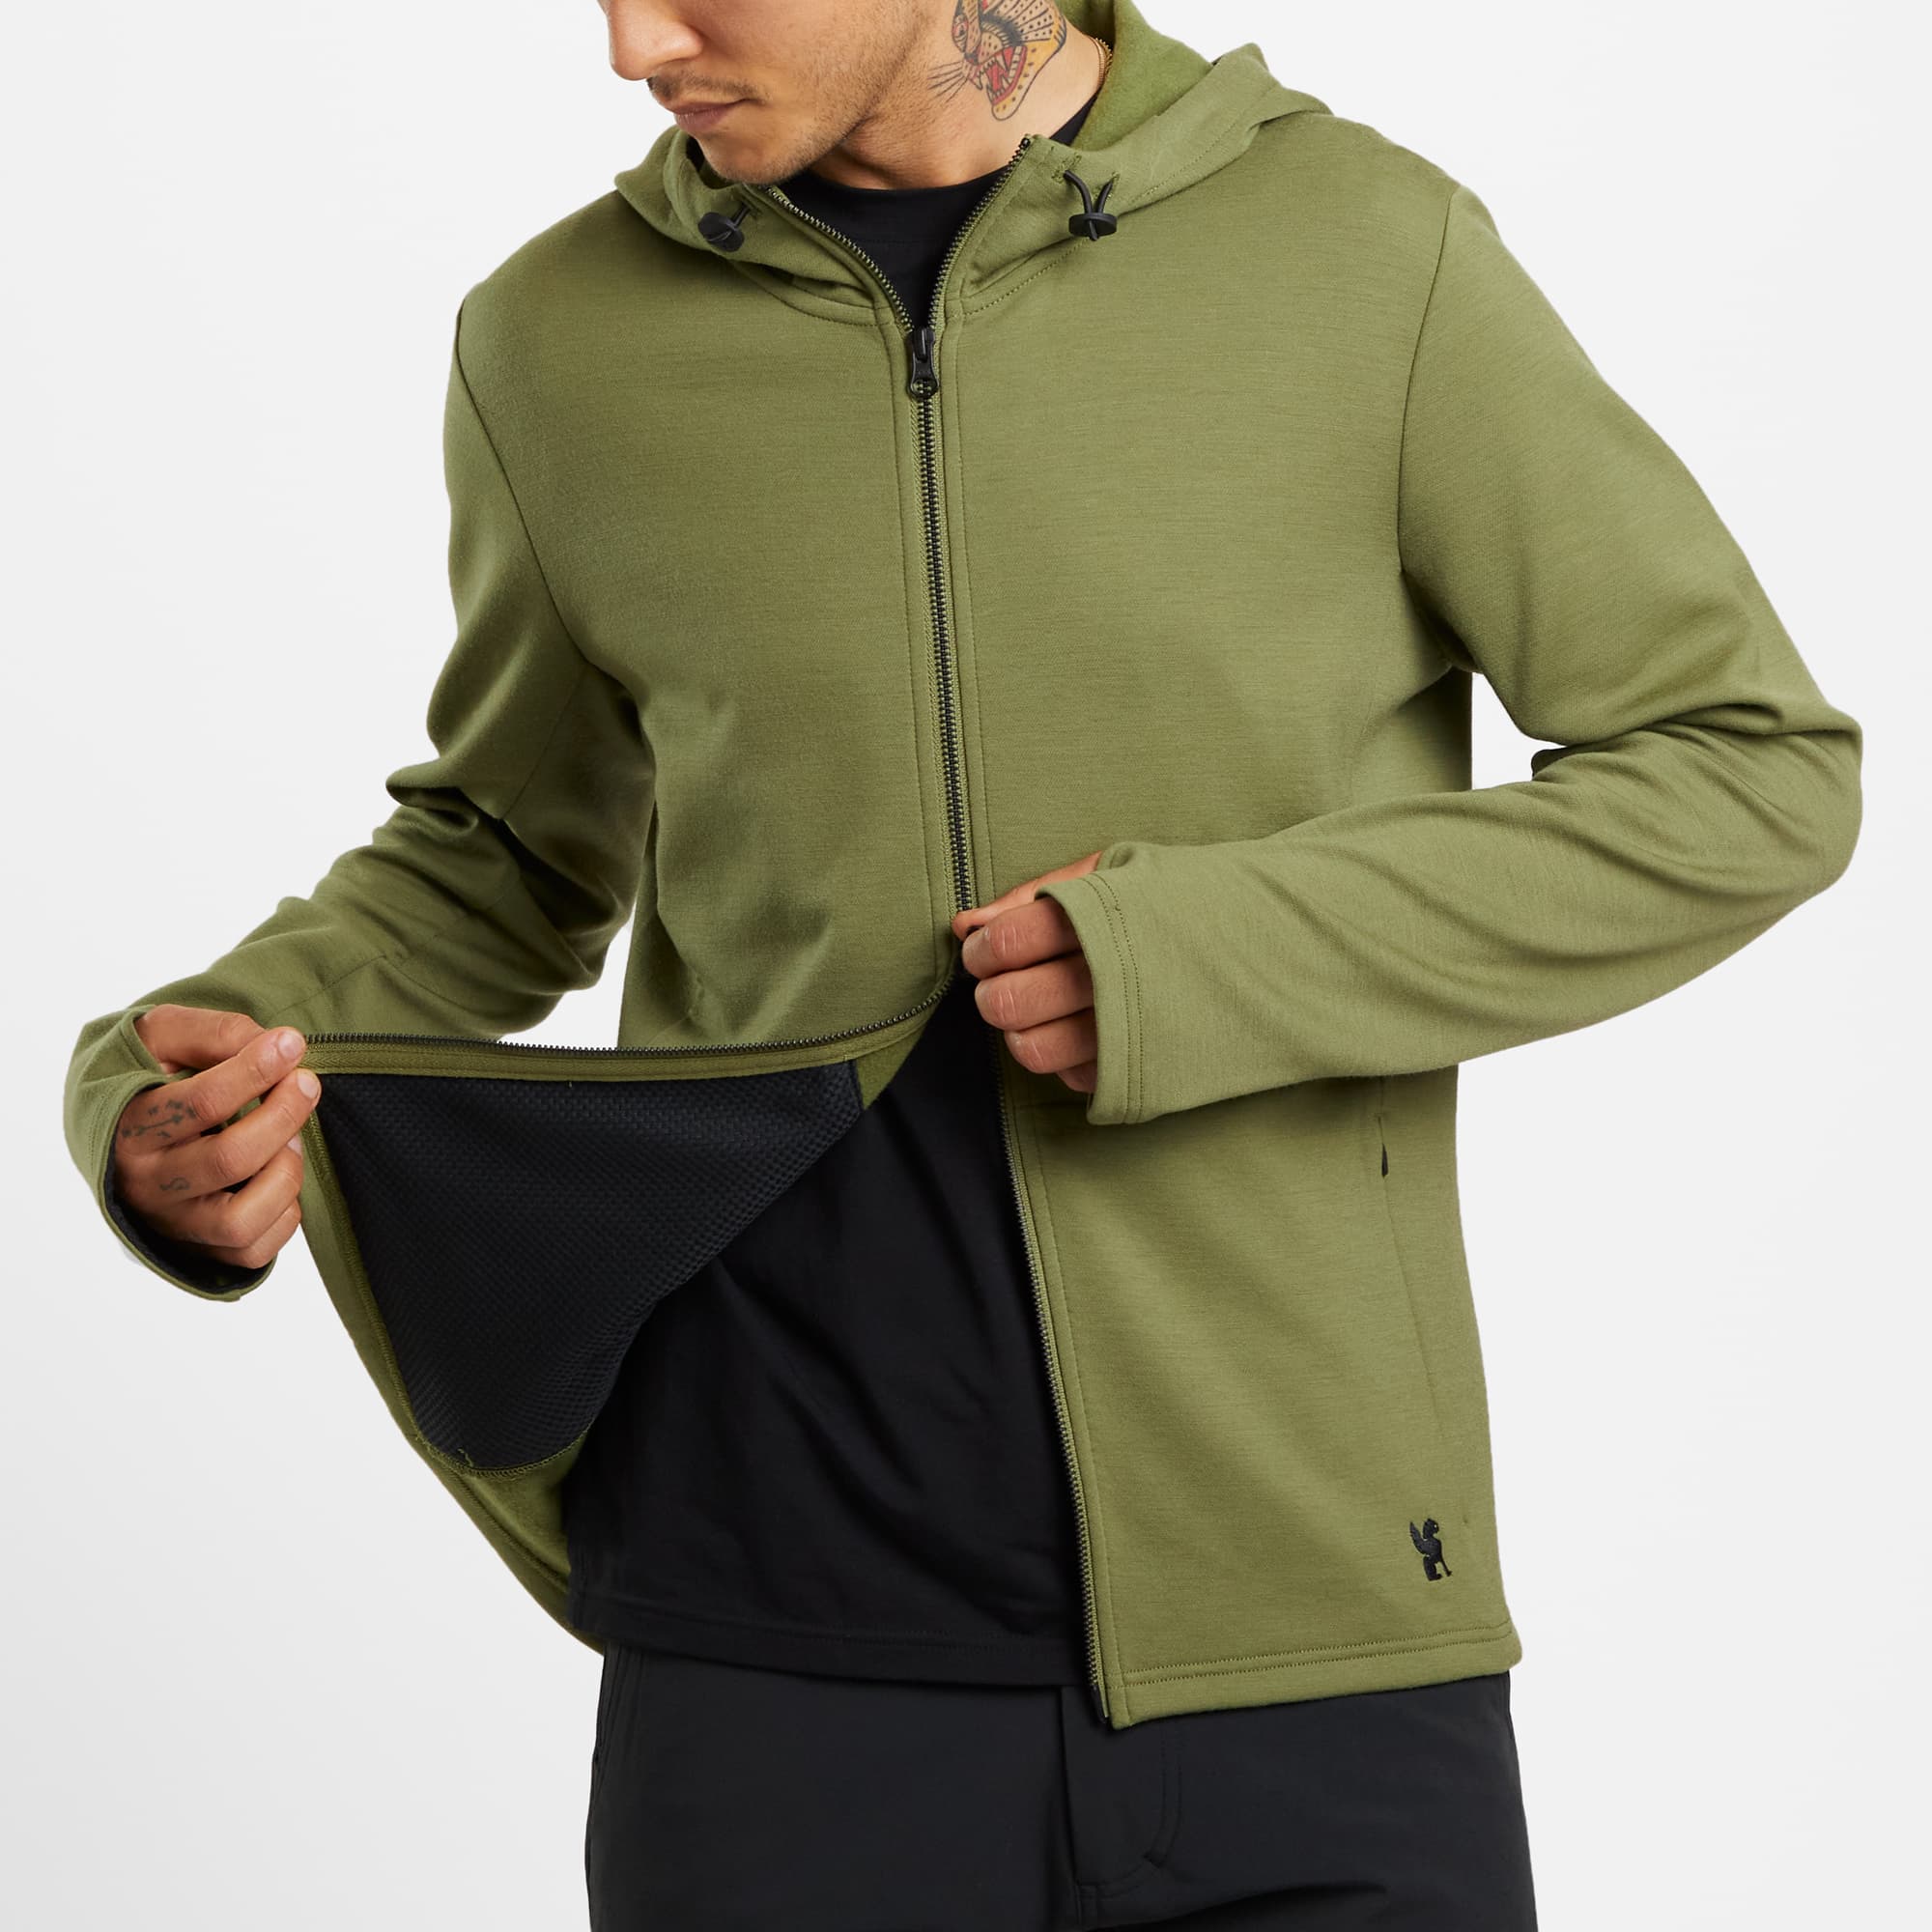 Men's merino blend hoodie in green worn by a man #color_olive branch